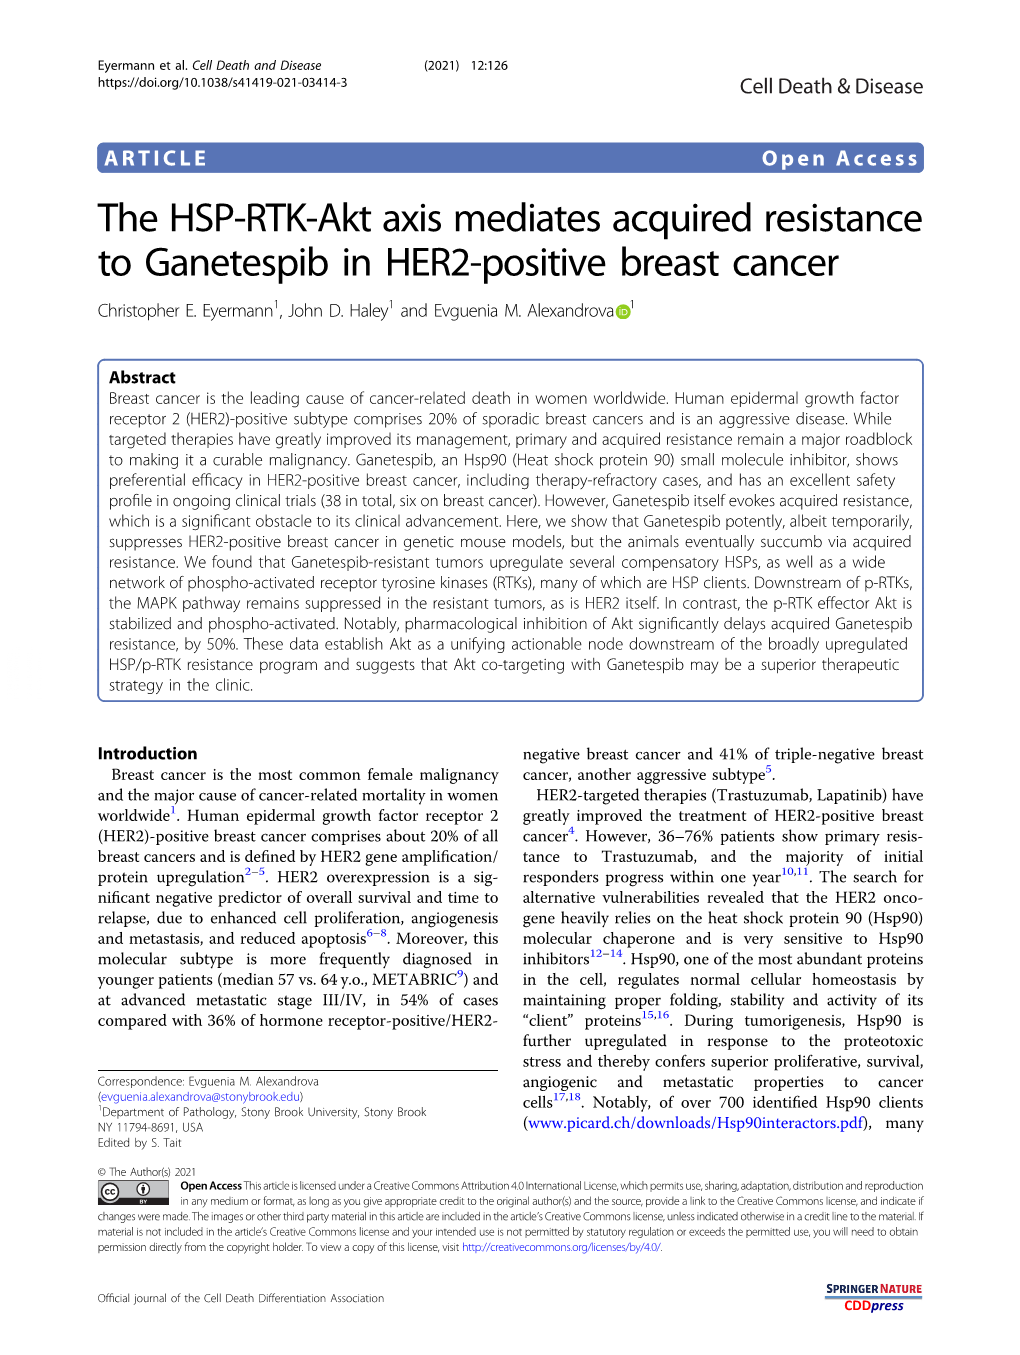 The HSP-RTK-Akt Axis Mediates Acquired Resistance to Ganetespib in HER2-Positive Breast Cancer Christopher E